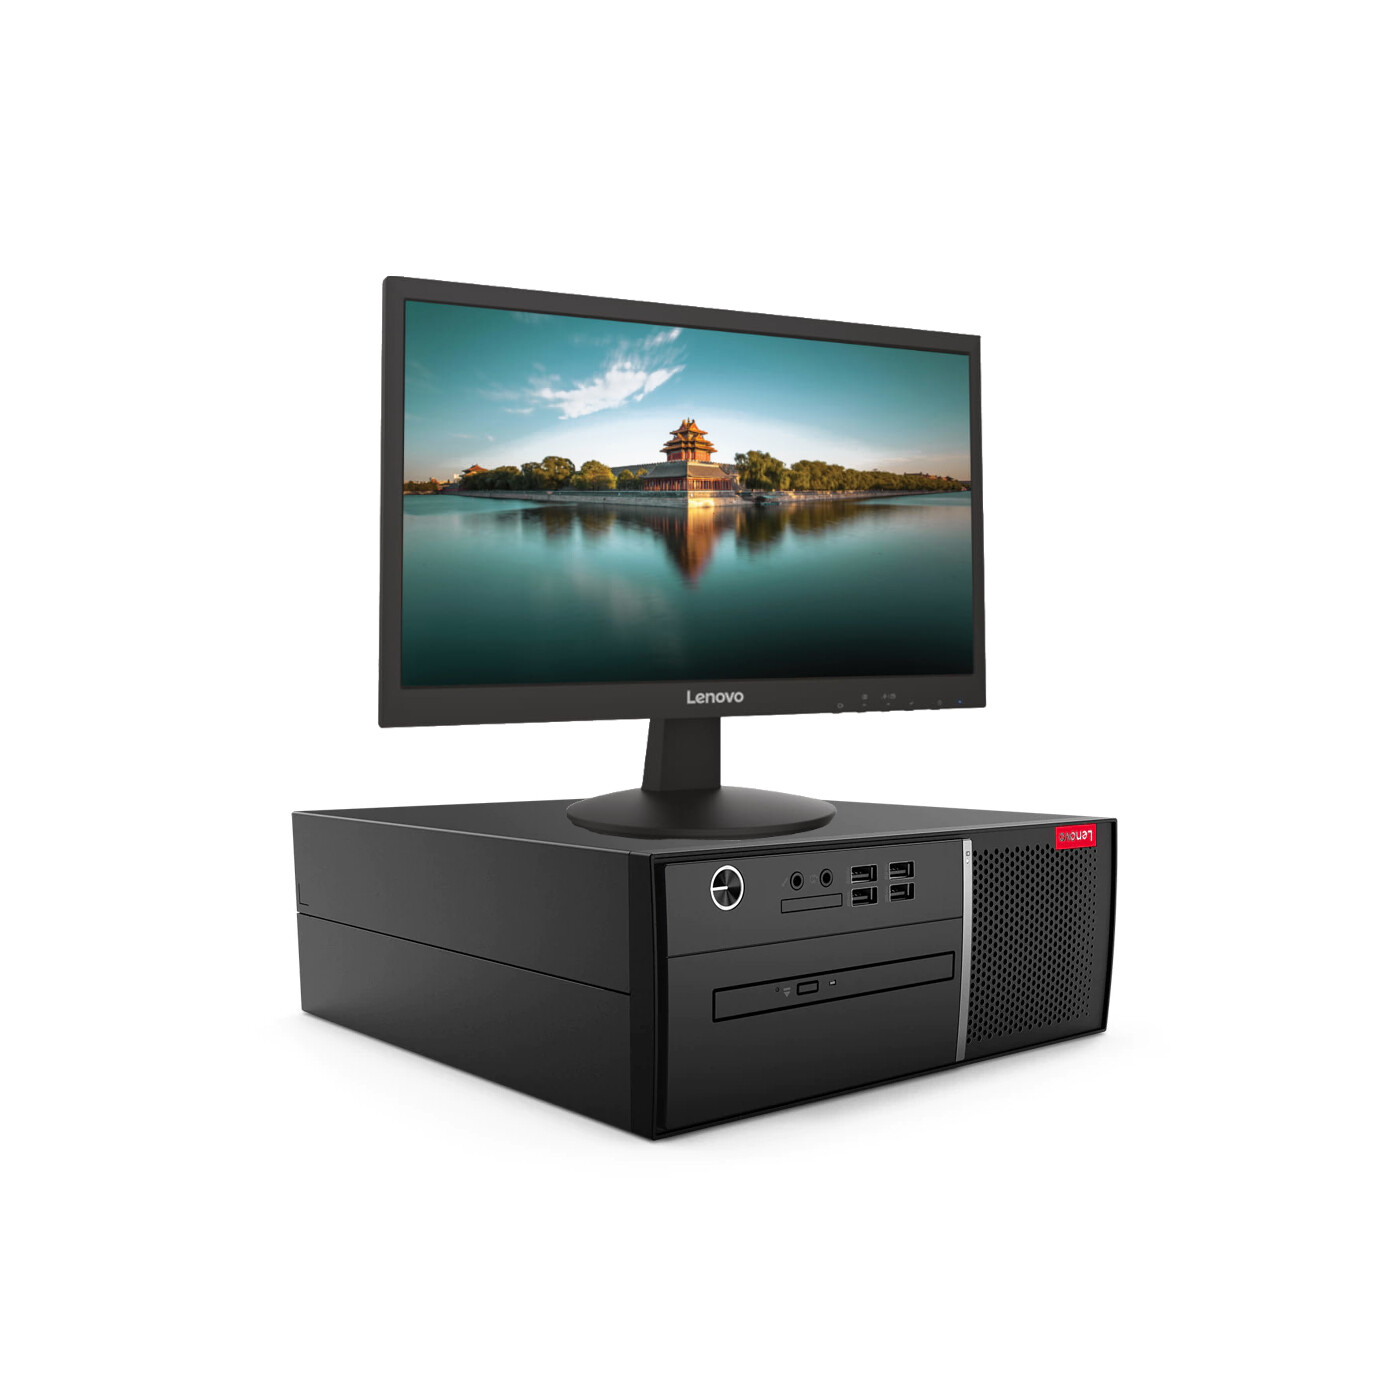 Lenovo V530s SmallTower + 21.5 inch + Keyboard and Mouse Intel Core i5-9400/4GB/1TB)